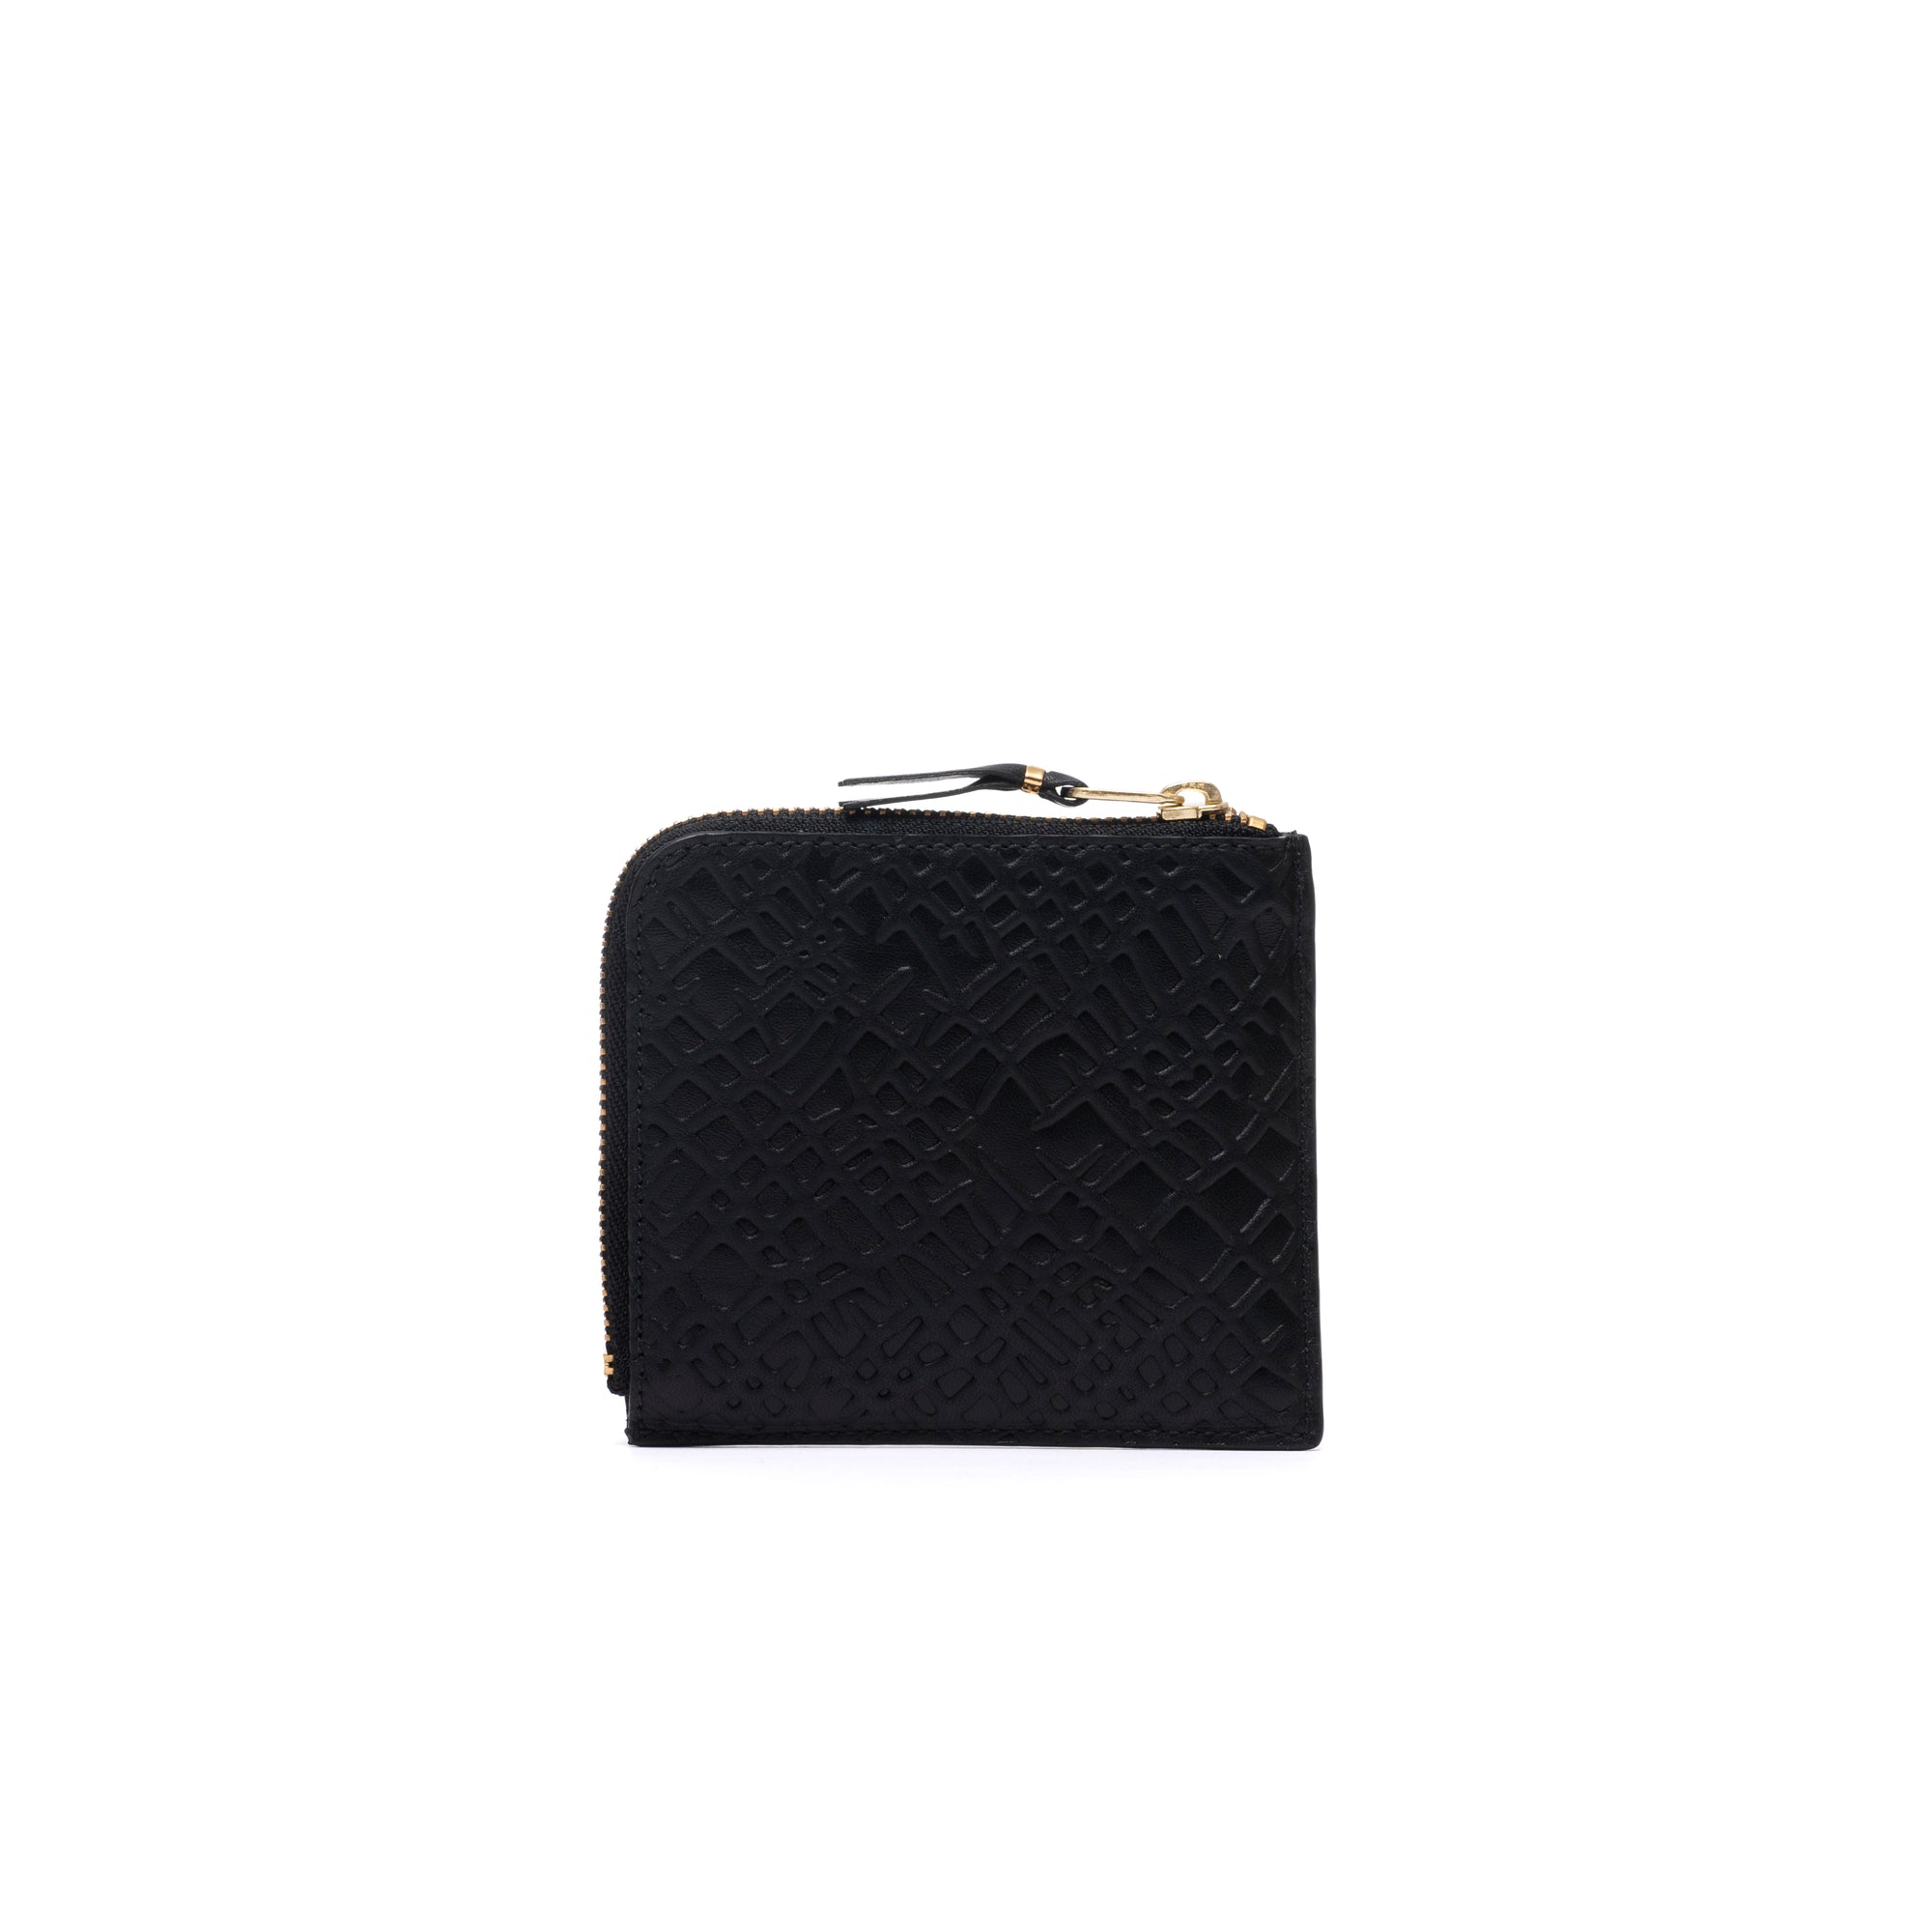 CDG WALLET - Embossed Roots - (SA3100ER Black) view 2